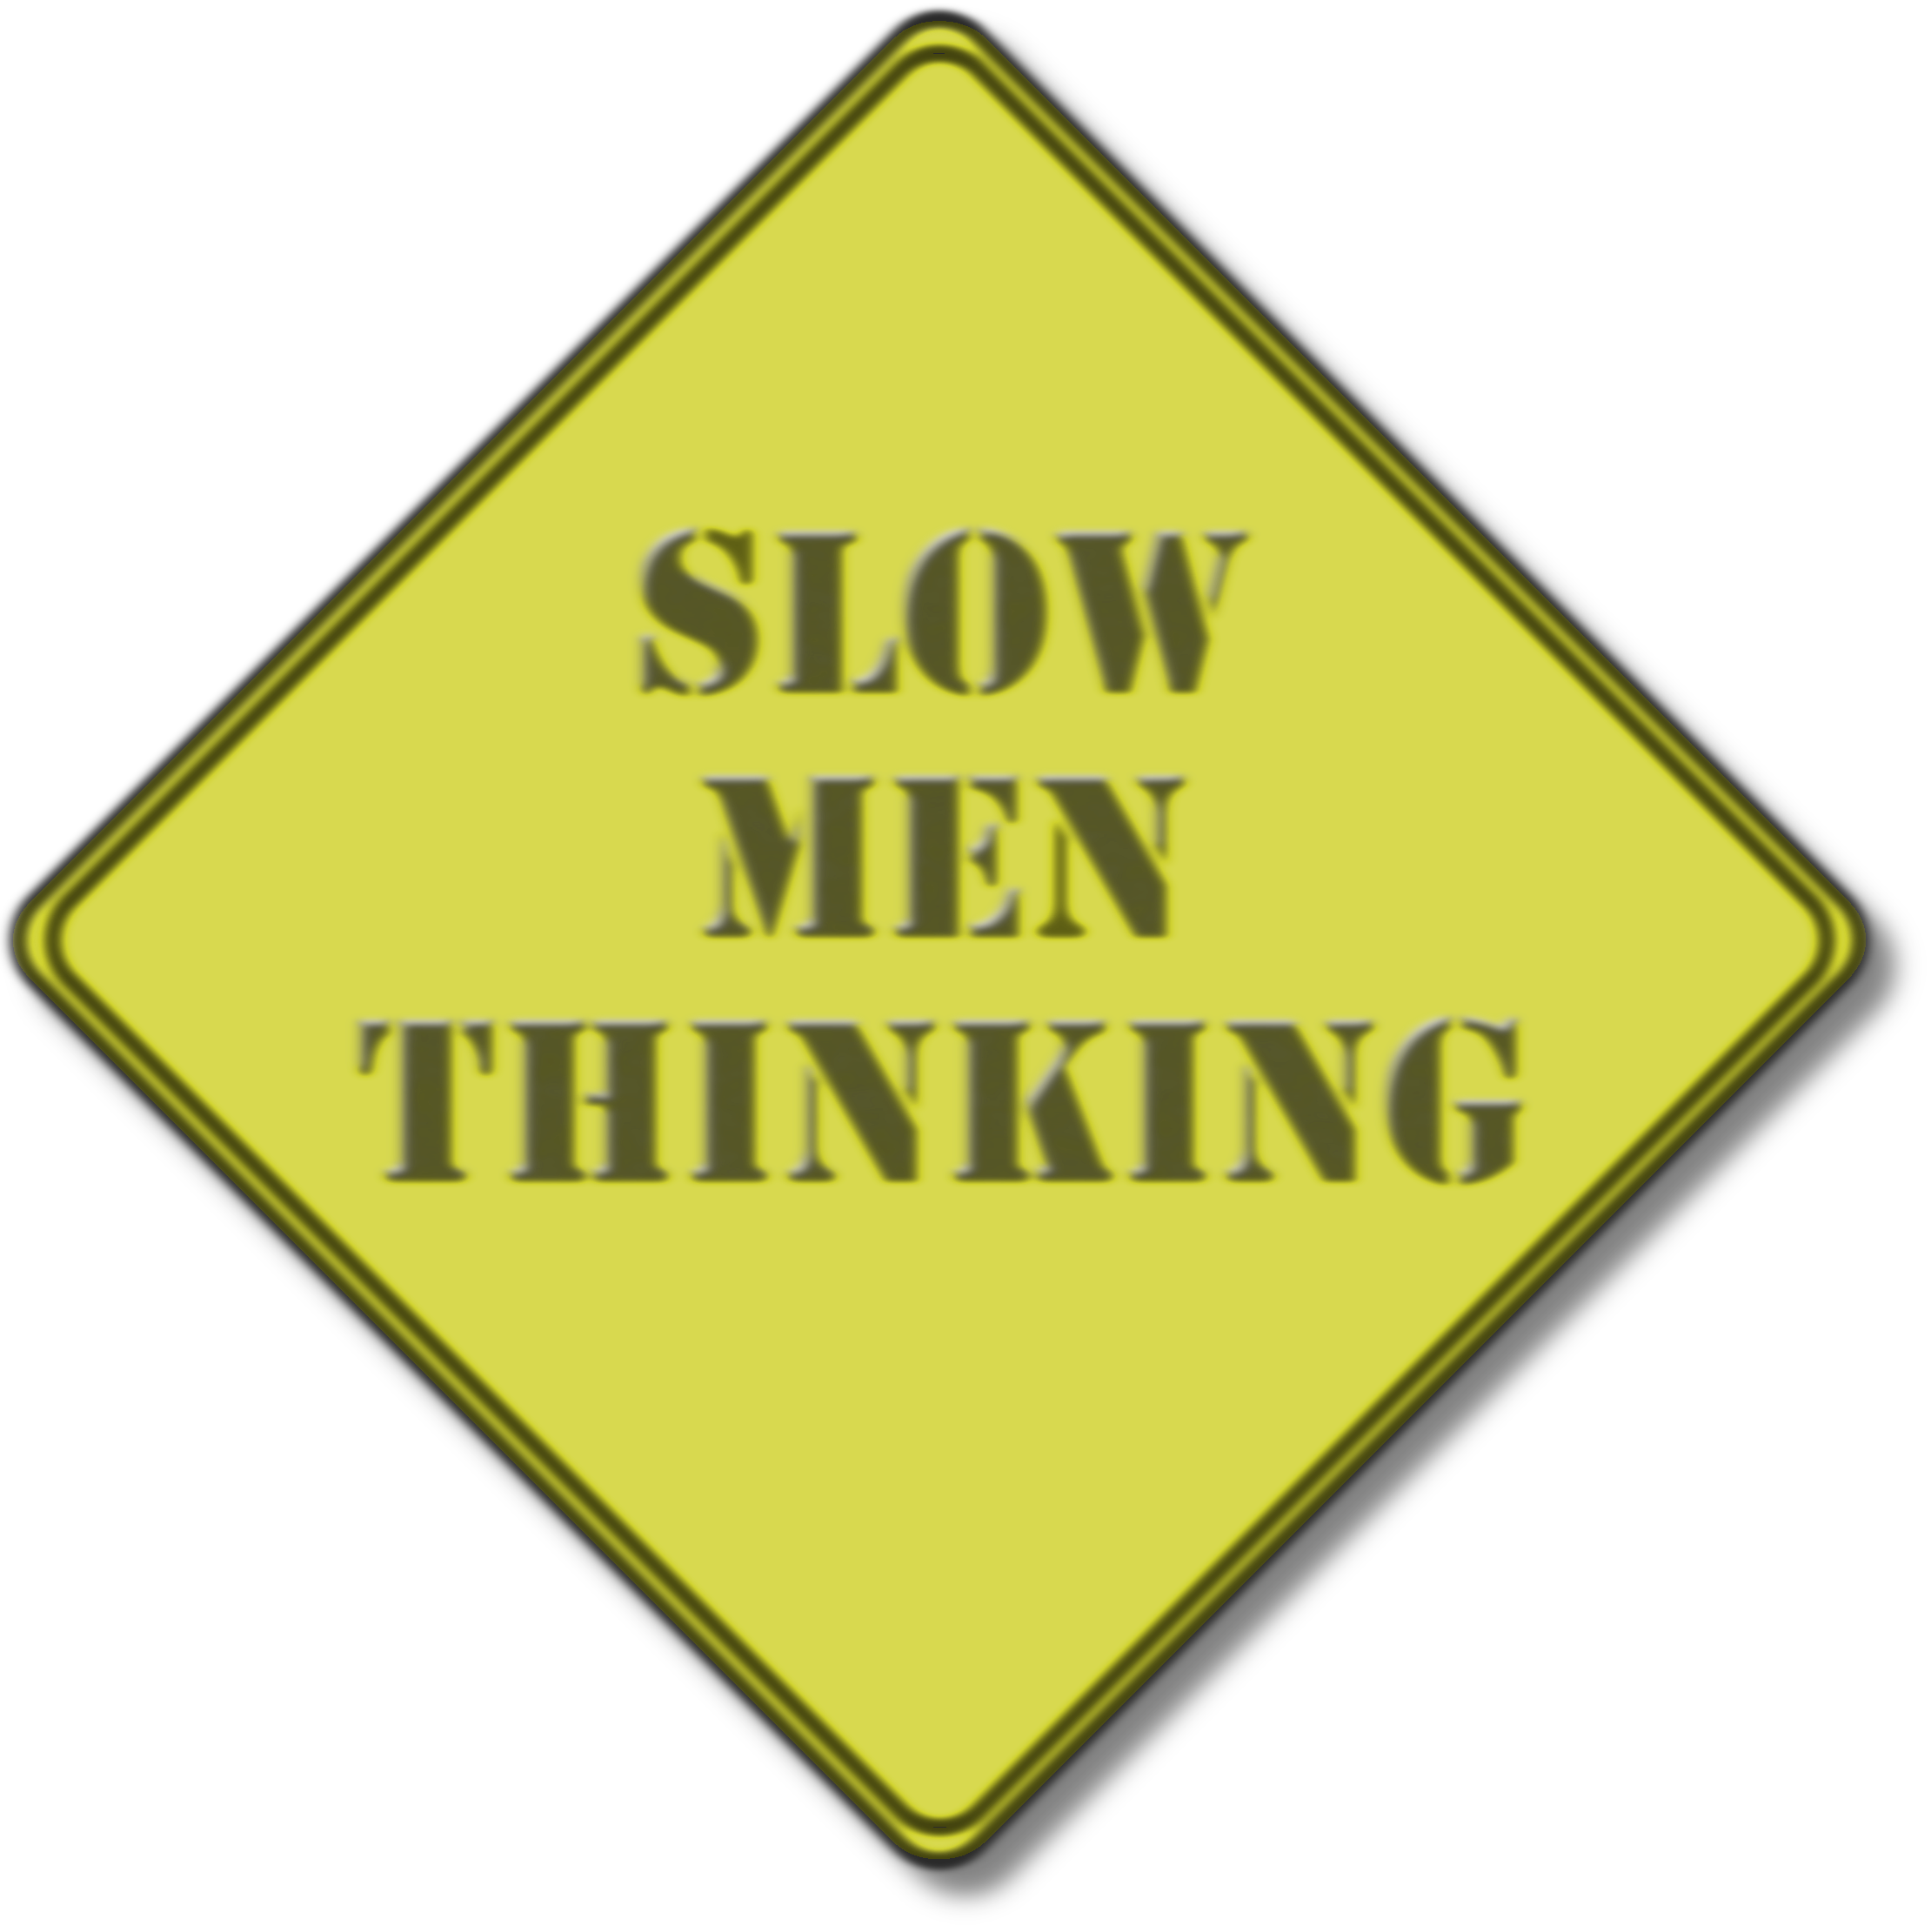 Out of focus Slow Men Thinking  background element